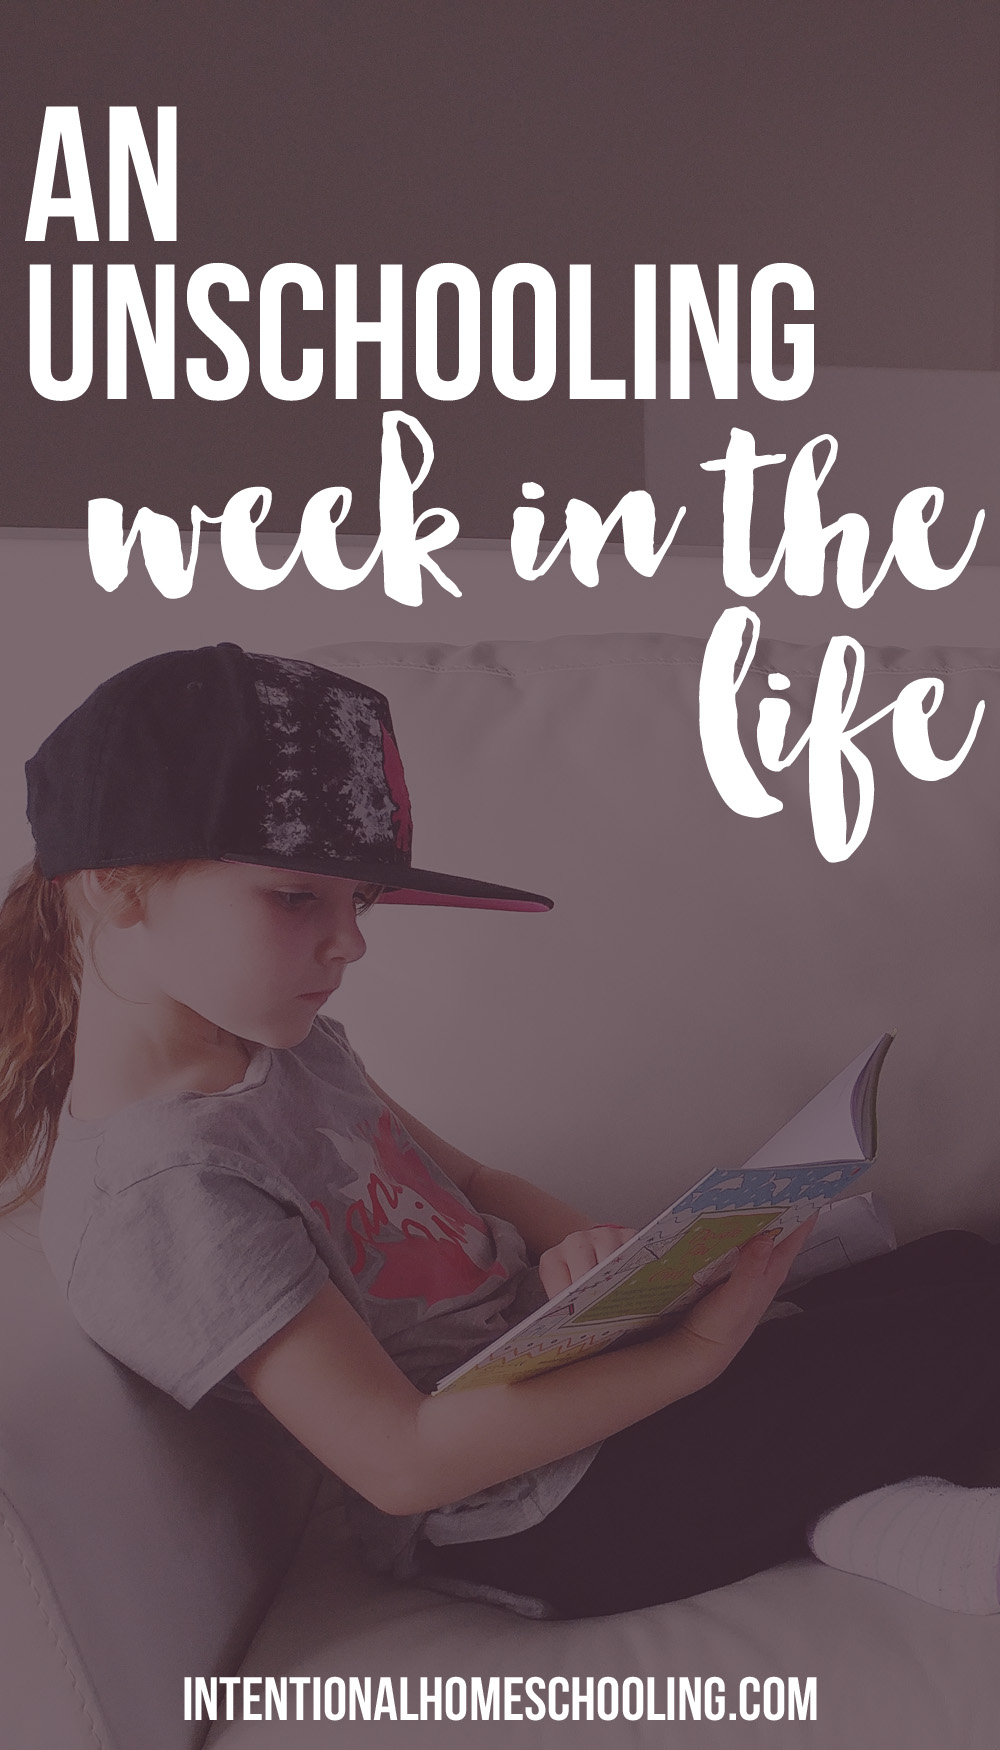 A week in the life while unschooling. While we may be unschooling lots of learning is taking place.